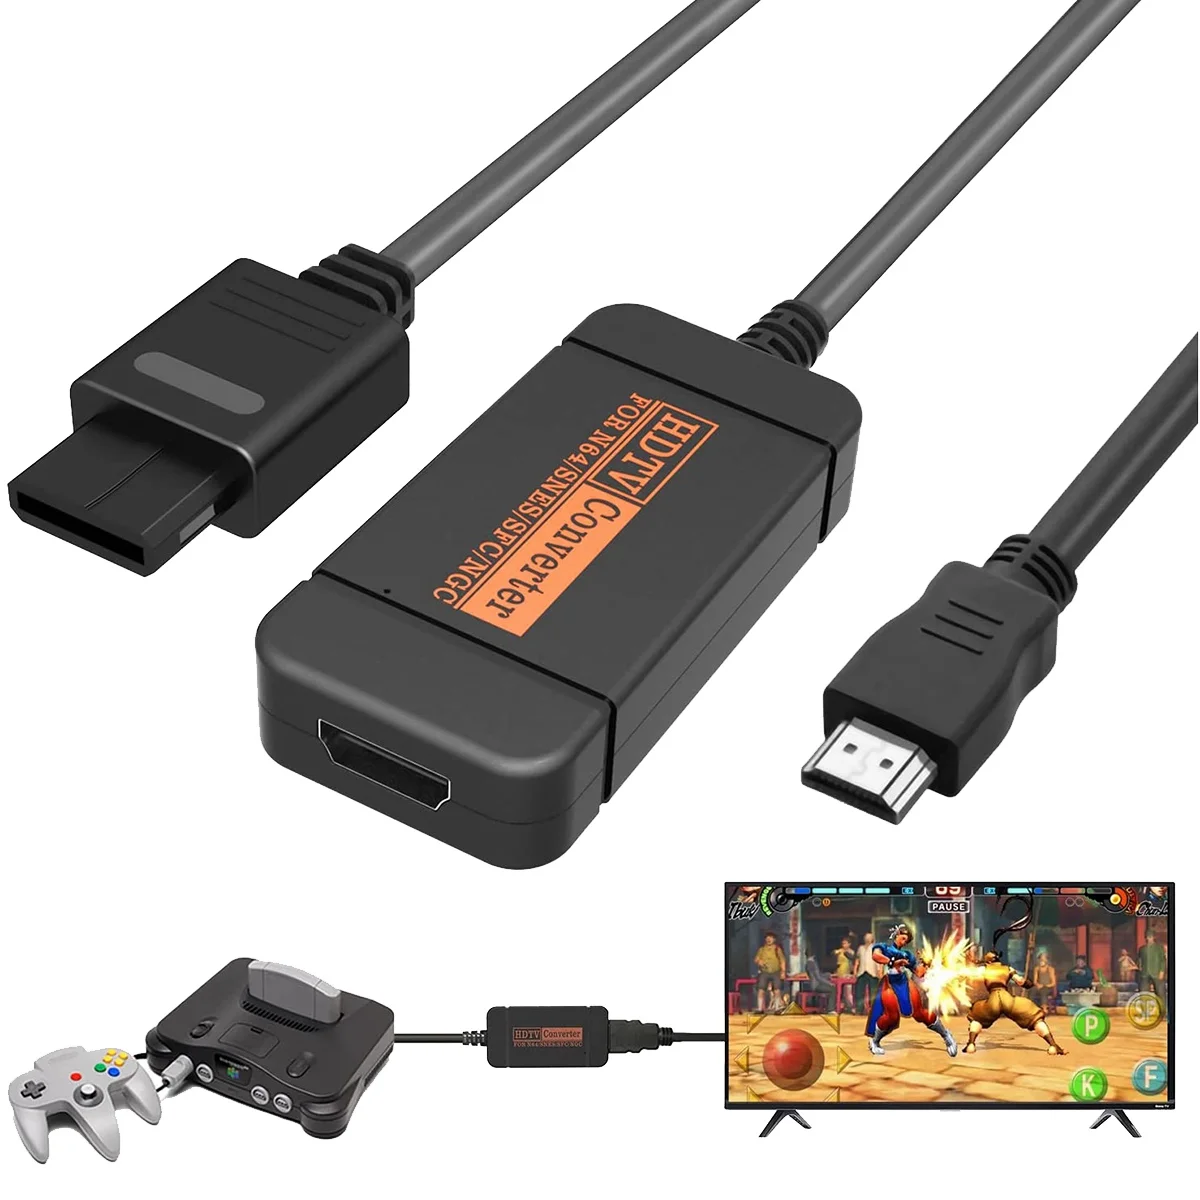 

1080P HDMI-Compatible Converter Adapter for N64 64/SNES/NGC/SFC Gamecube Retro Video Game Console Cable